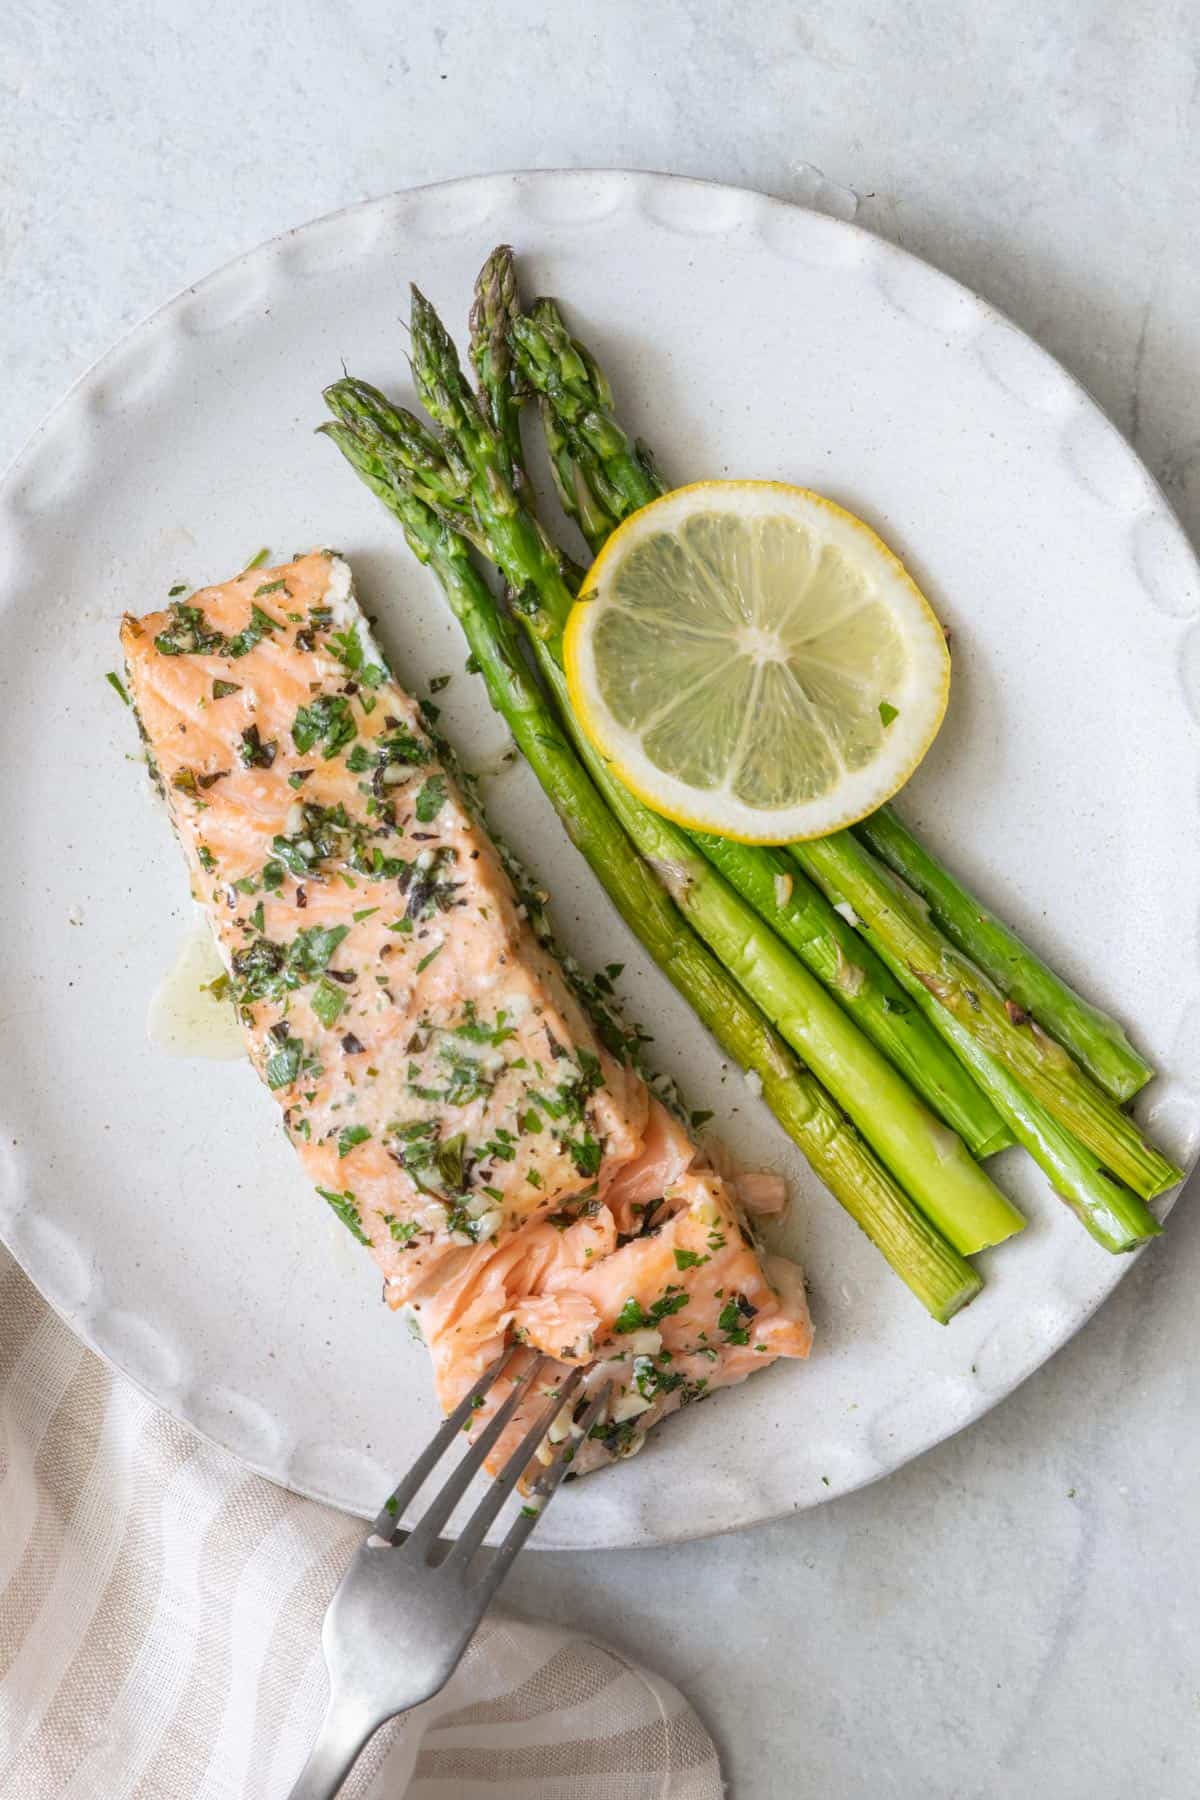 Roasted salmon, asparagus, and a fresh lemon slice on a white plate and a fork flaking away some of the fish.